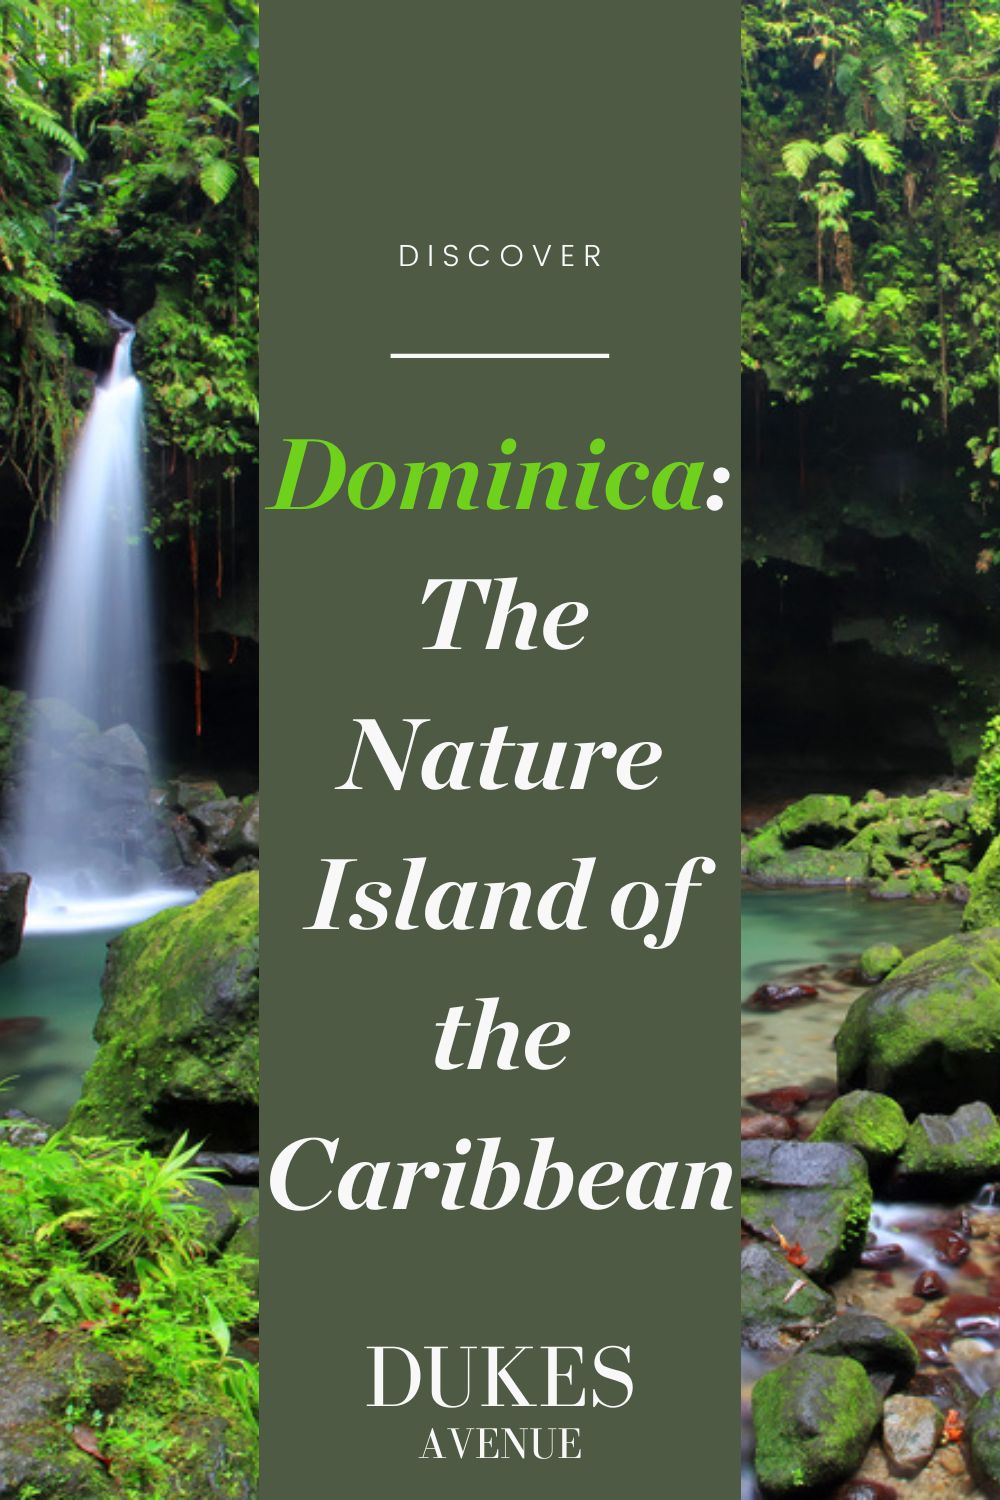 Image of waterfall in Dominica with text overlay 'Dominica - The Nature Island of the Caribbean'